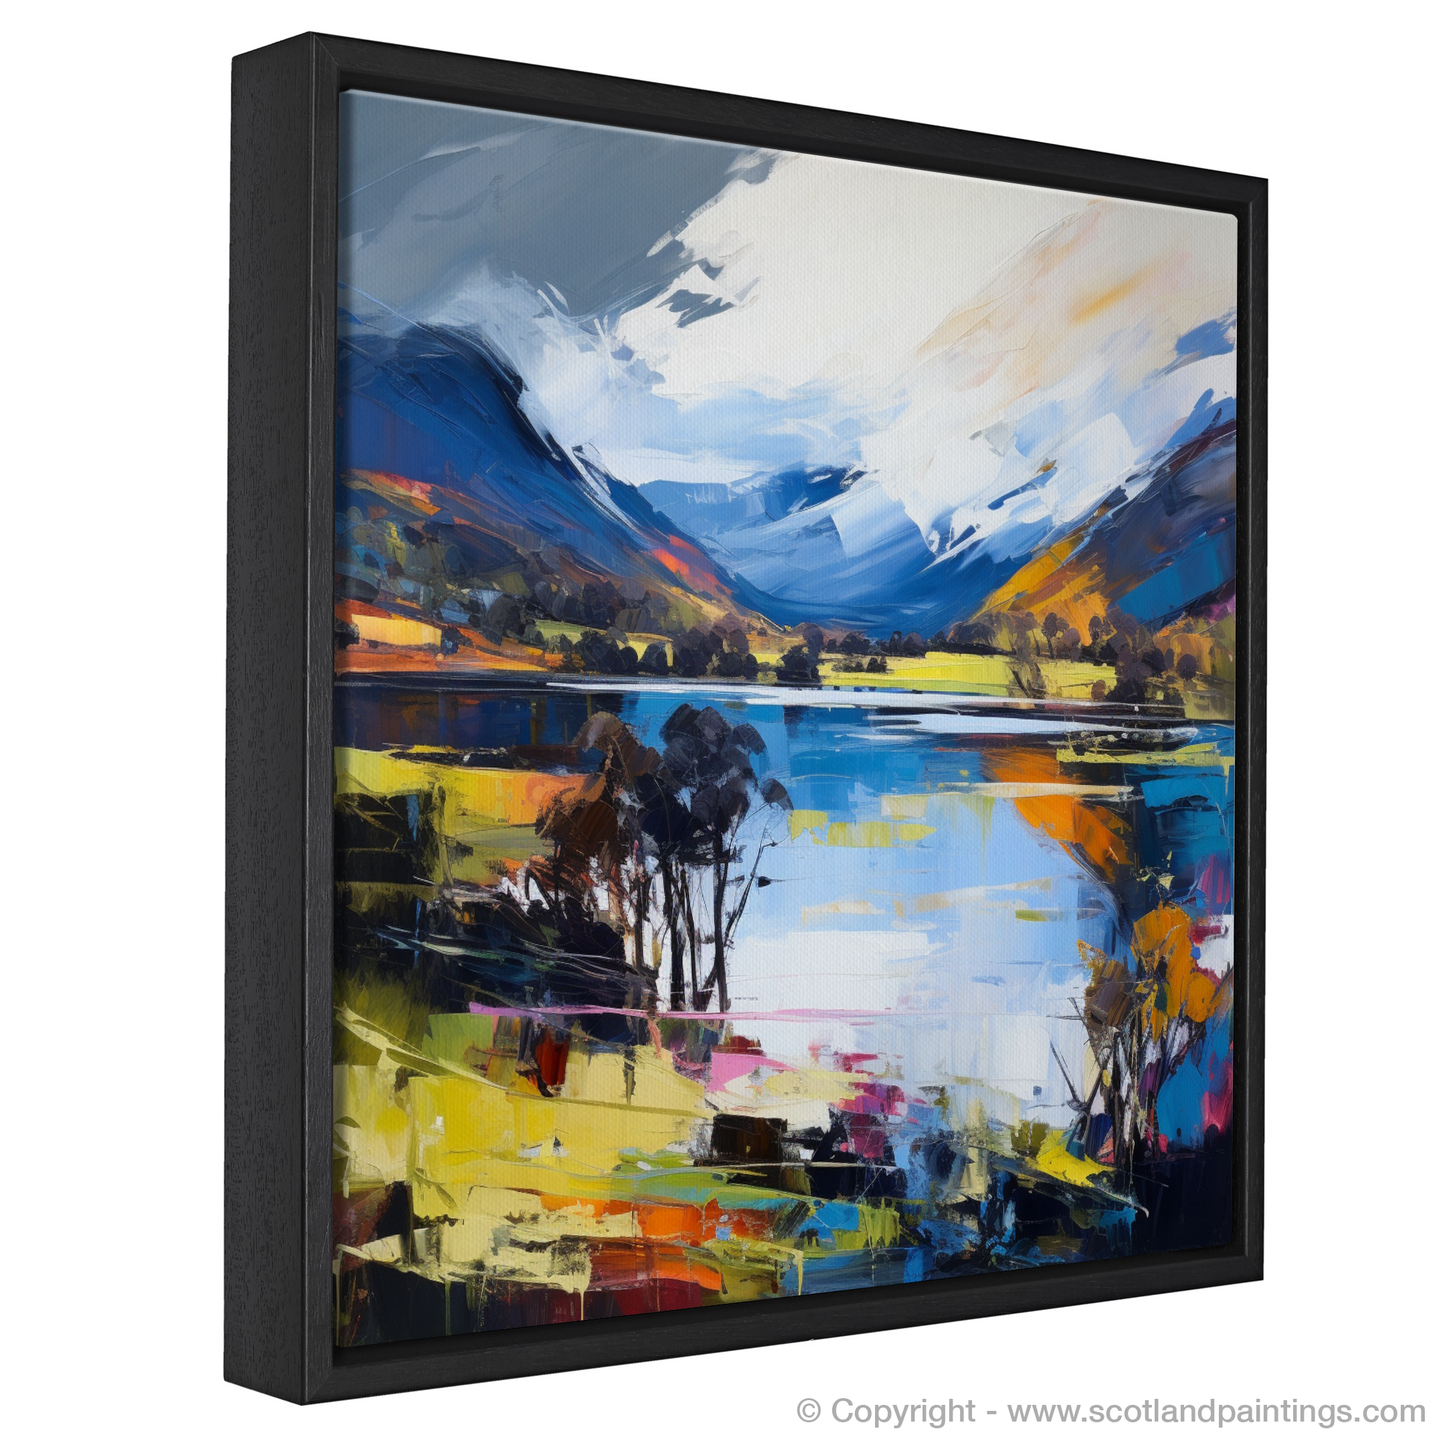 Painting and Art Print of Loch Earn, Perth and Kinross entitled "Captivating Loch Earn: An Expressionist Ode to Scottish Skies and Waters".